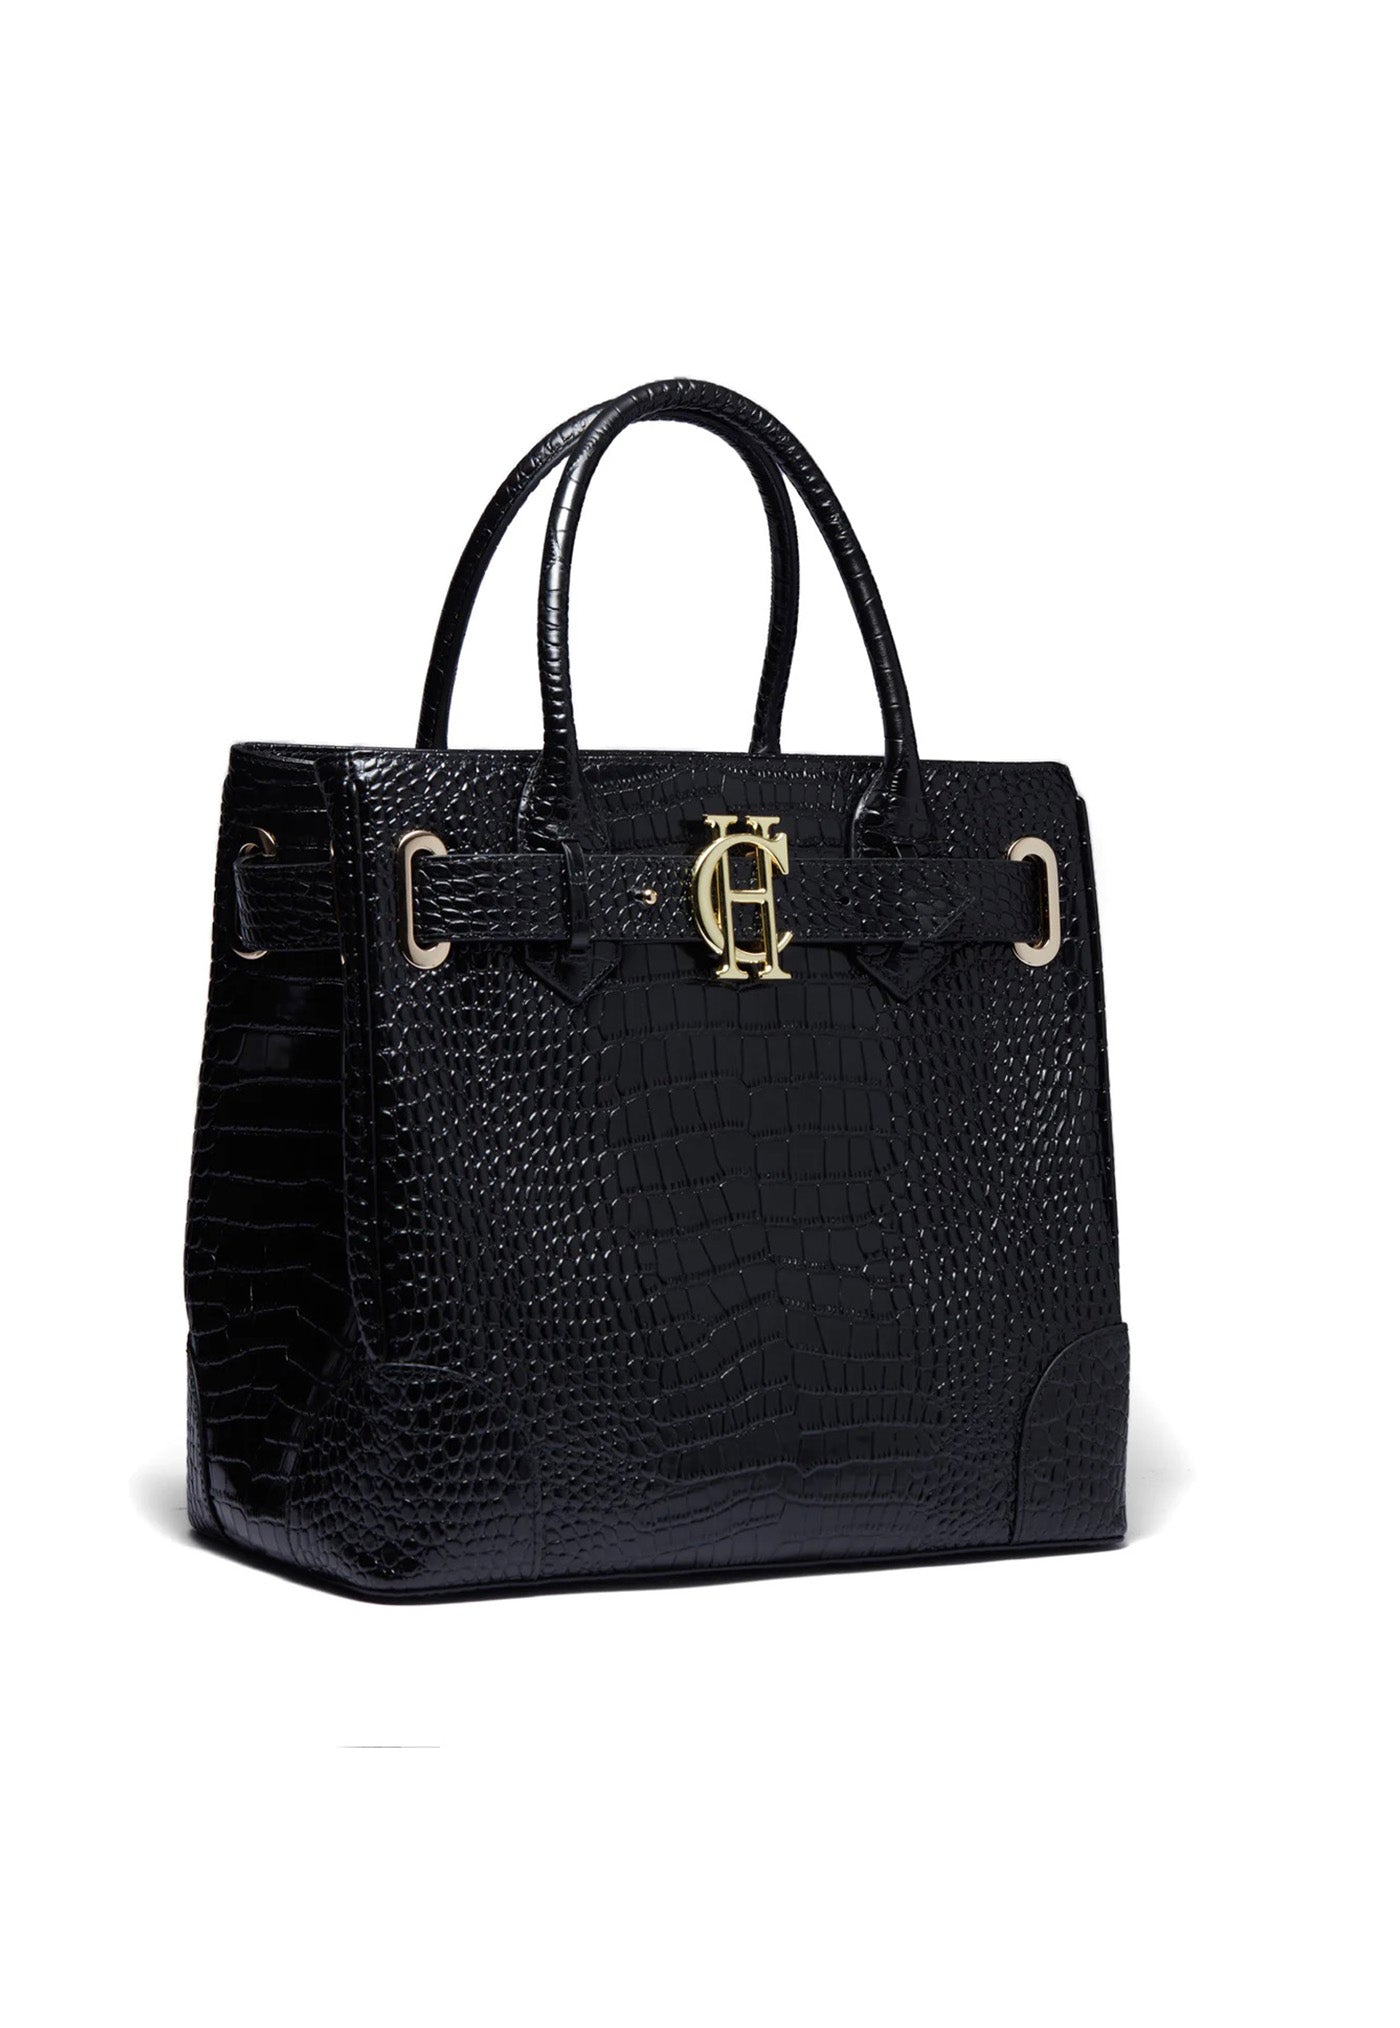 The Brompton Tote - Black Croc sold by Angel Divine